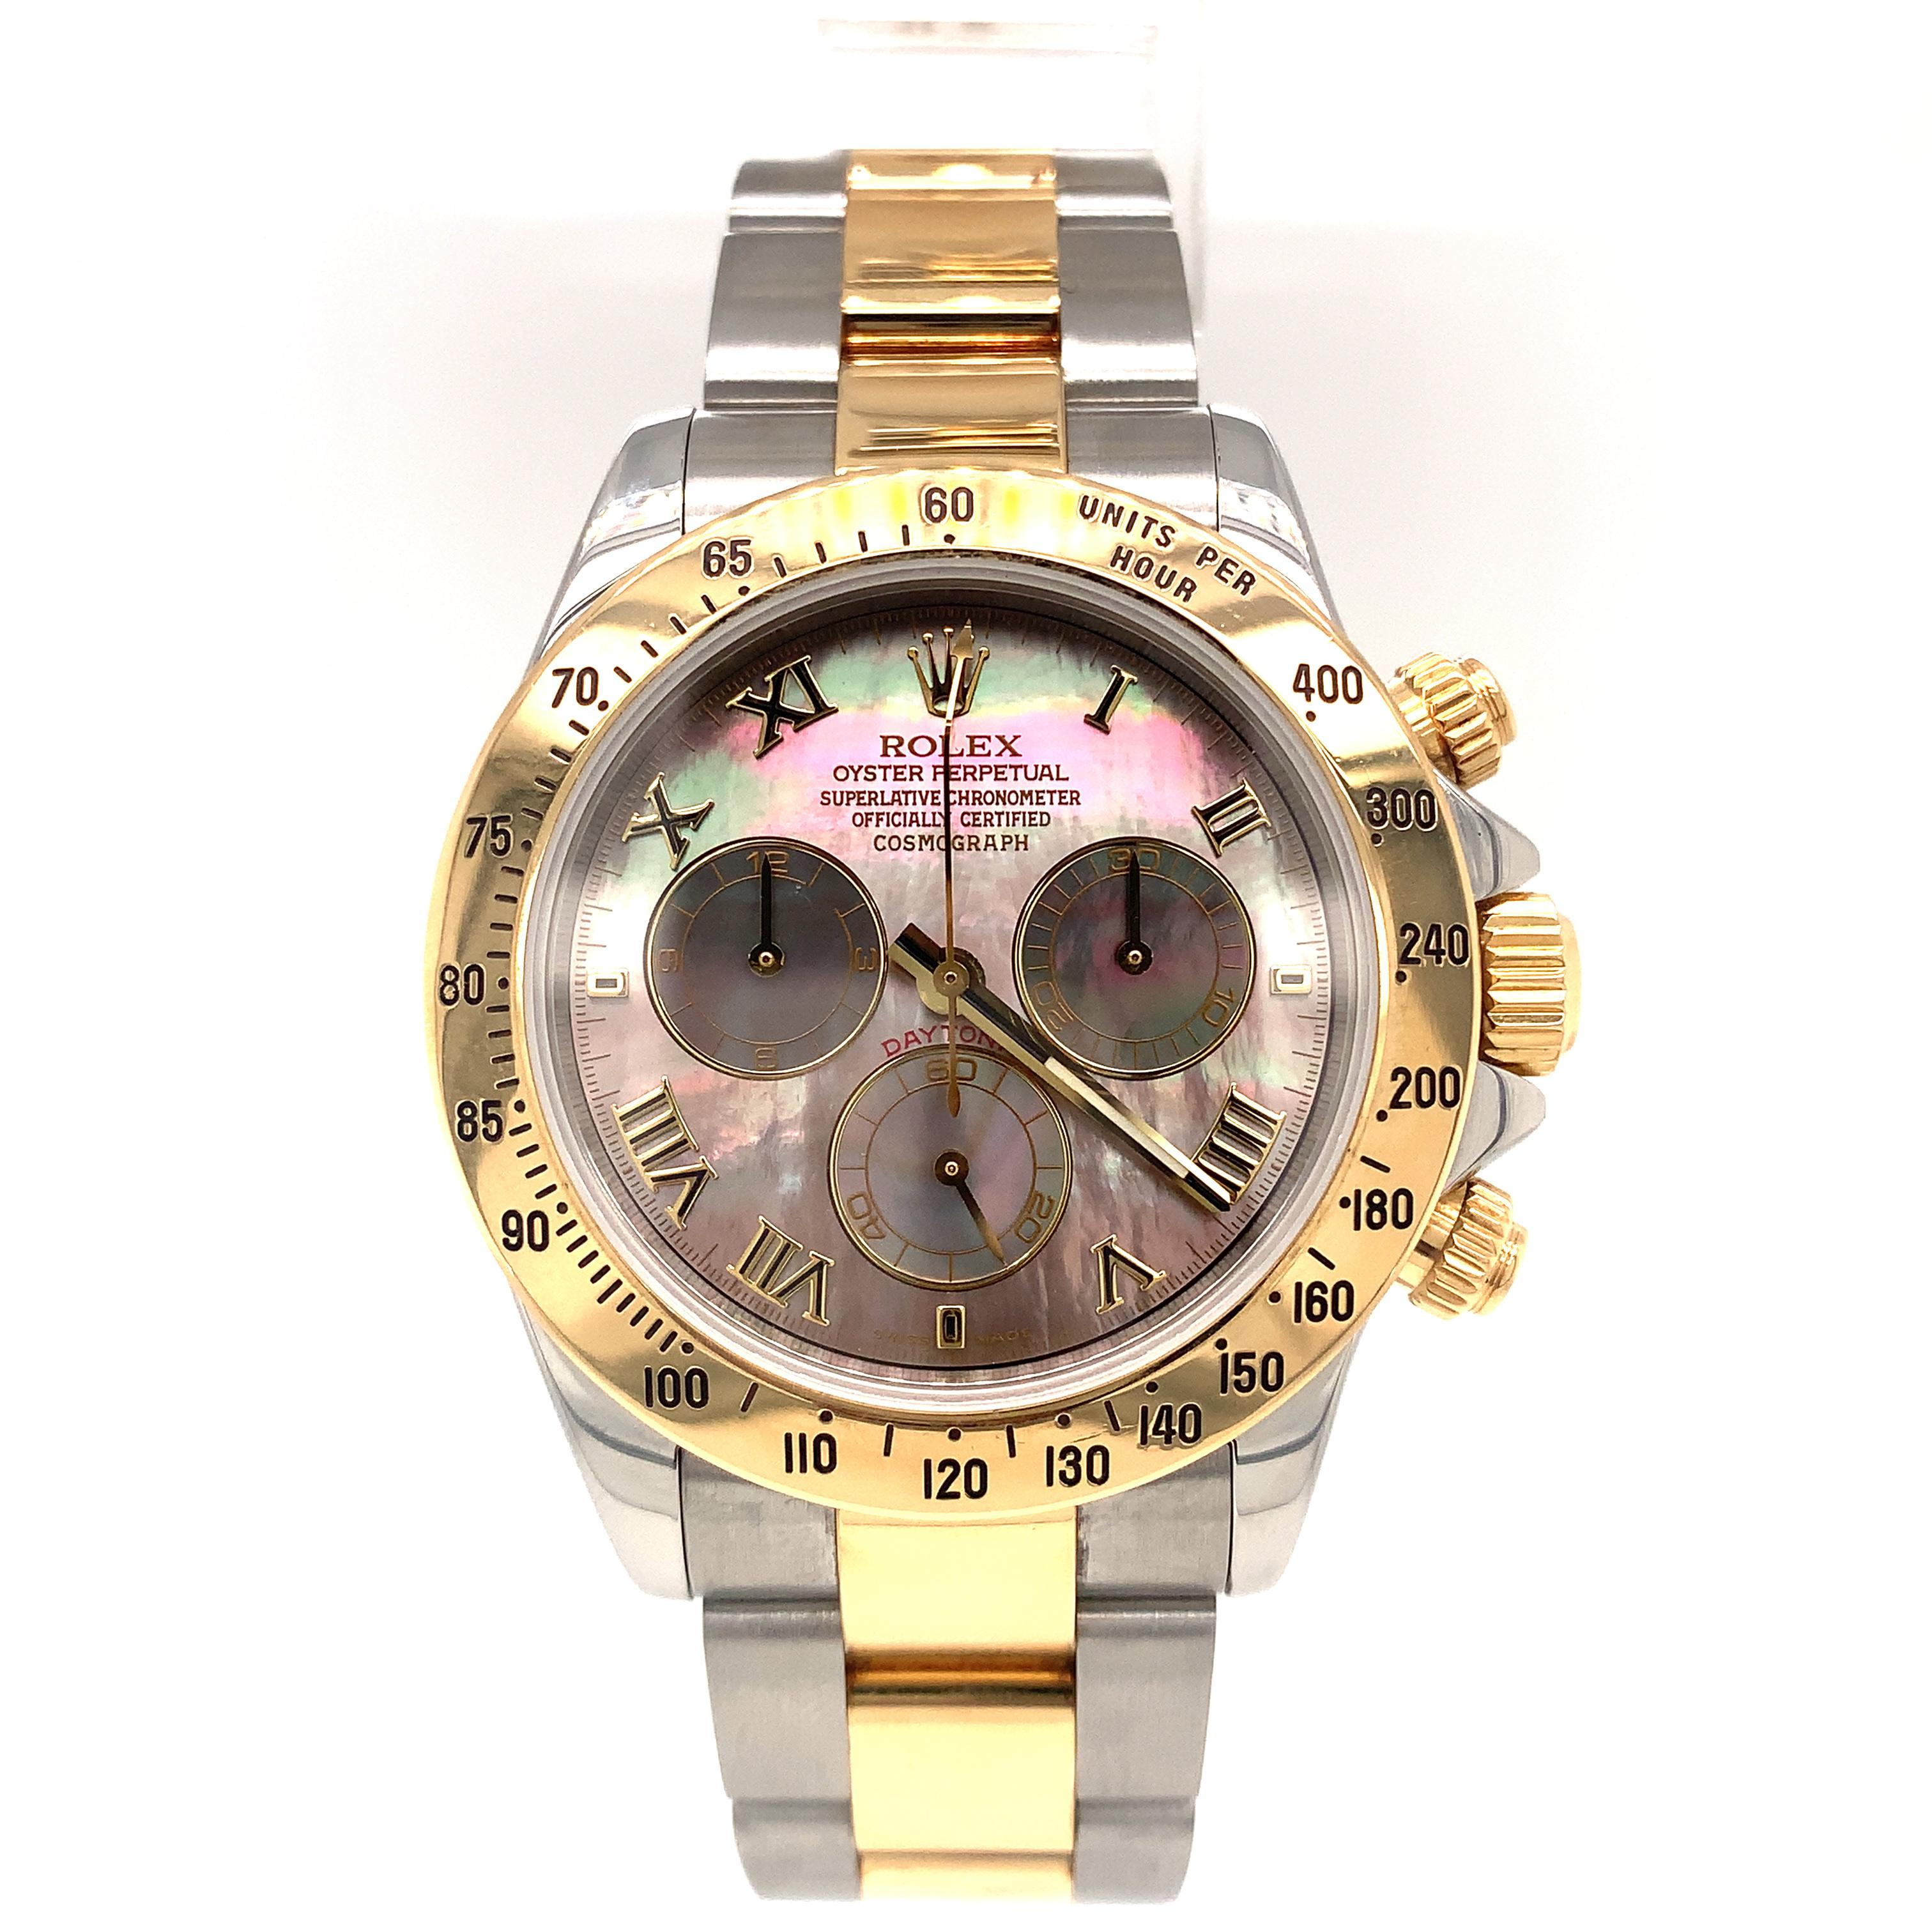 Modernist Rolex Daytona 116523 Stainless Steel 18k Yellow Gold  Mother of Pearl Dial